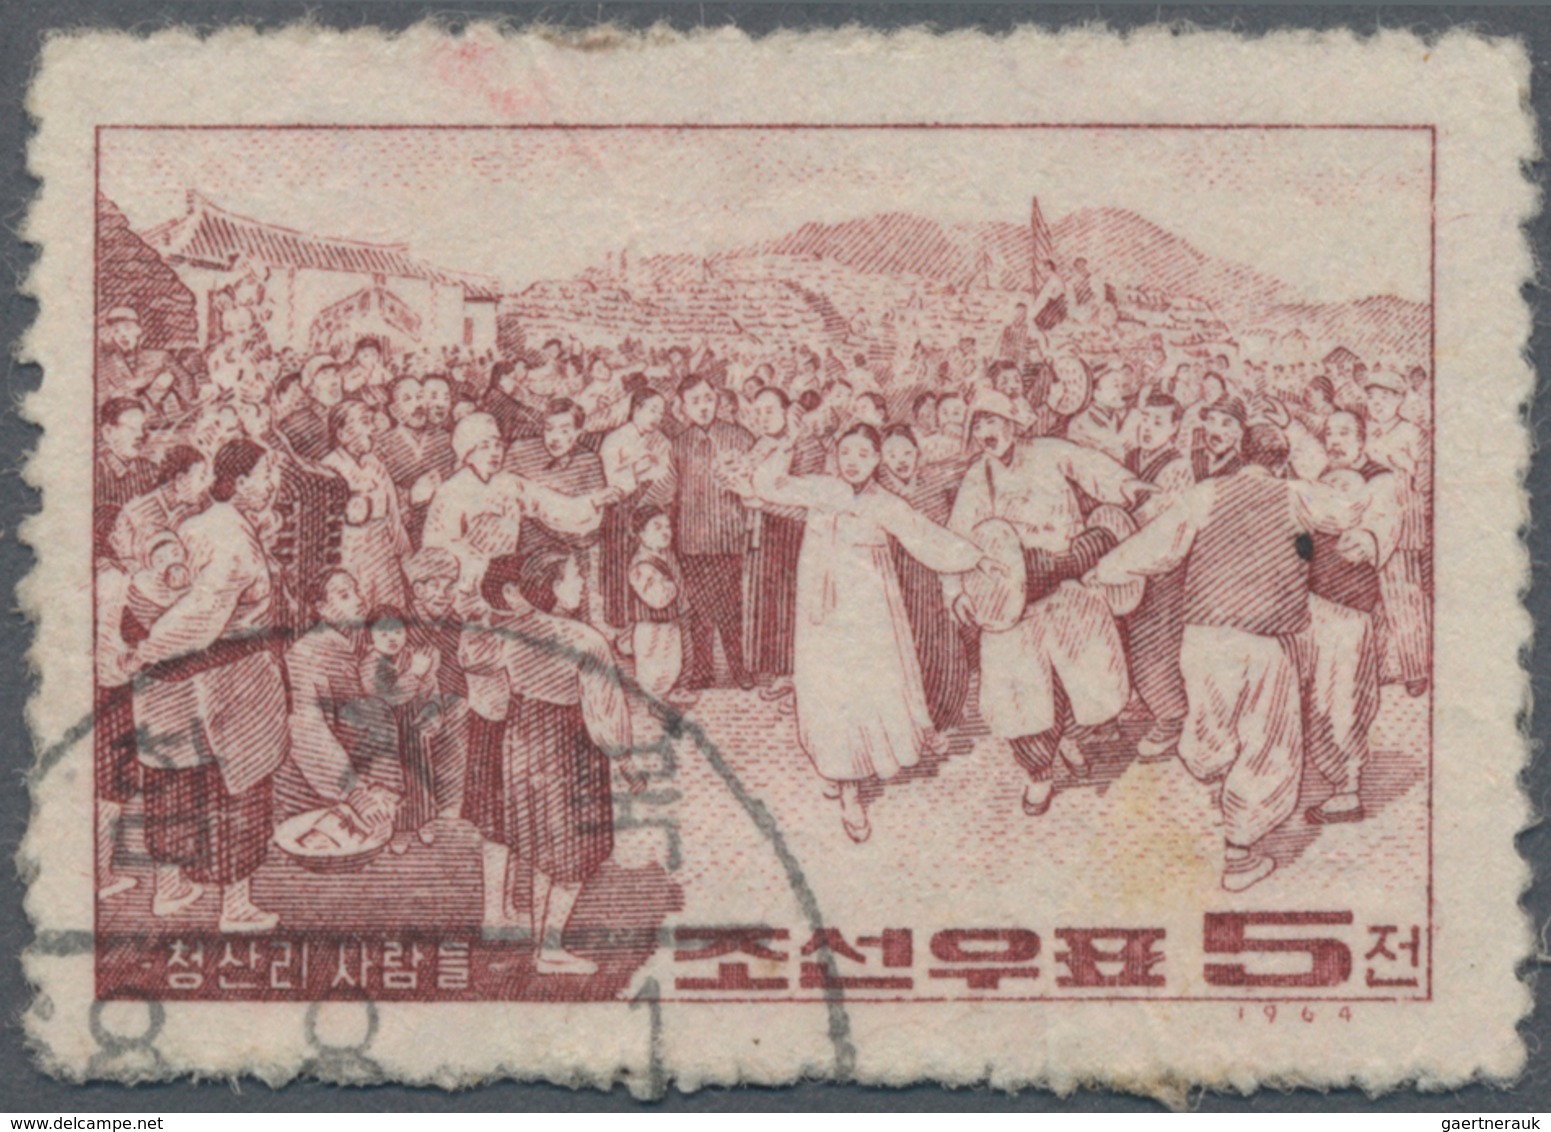 Korea-Nord: 1968, 5 Ch. Brown Unissued, But Canc. 1968.8.1, Some Pieces Were Sold By P.o. In In Hamk - Korea (Noord)